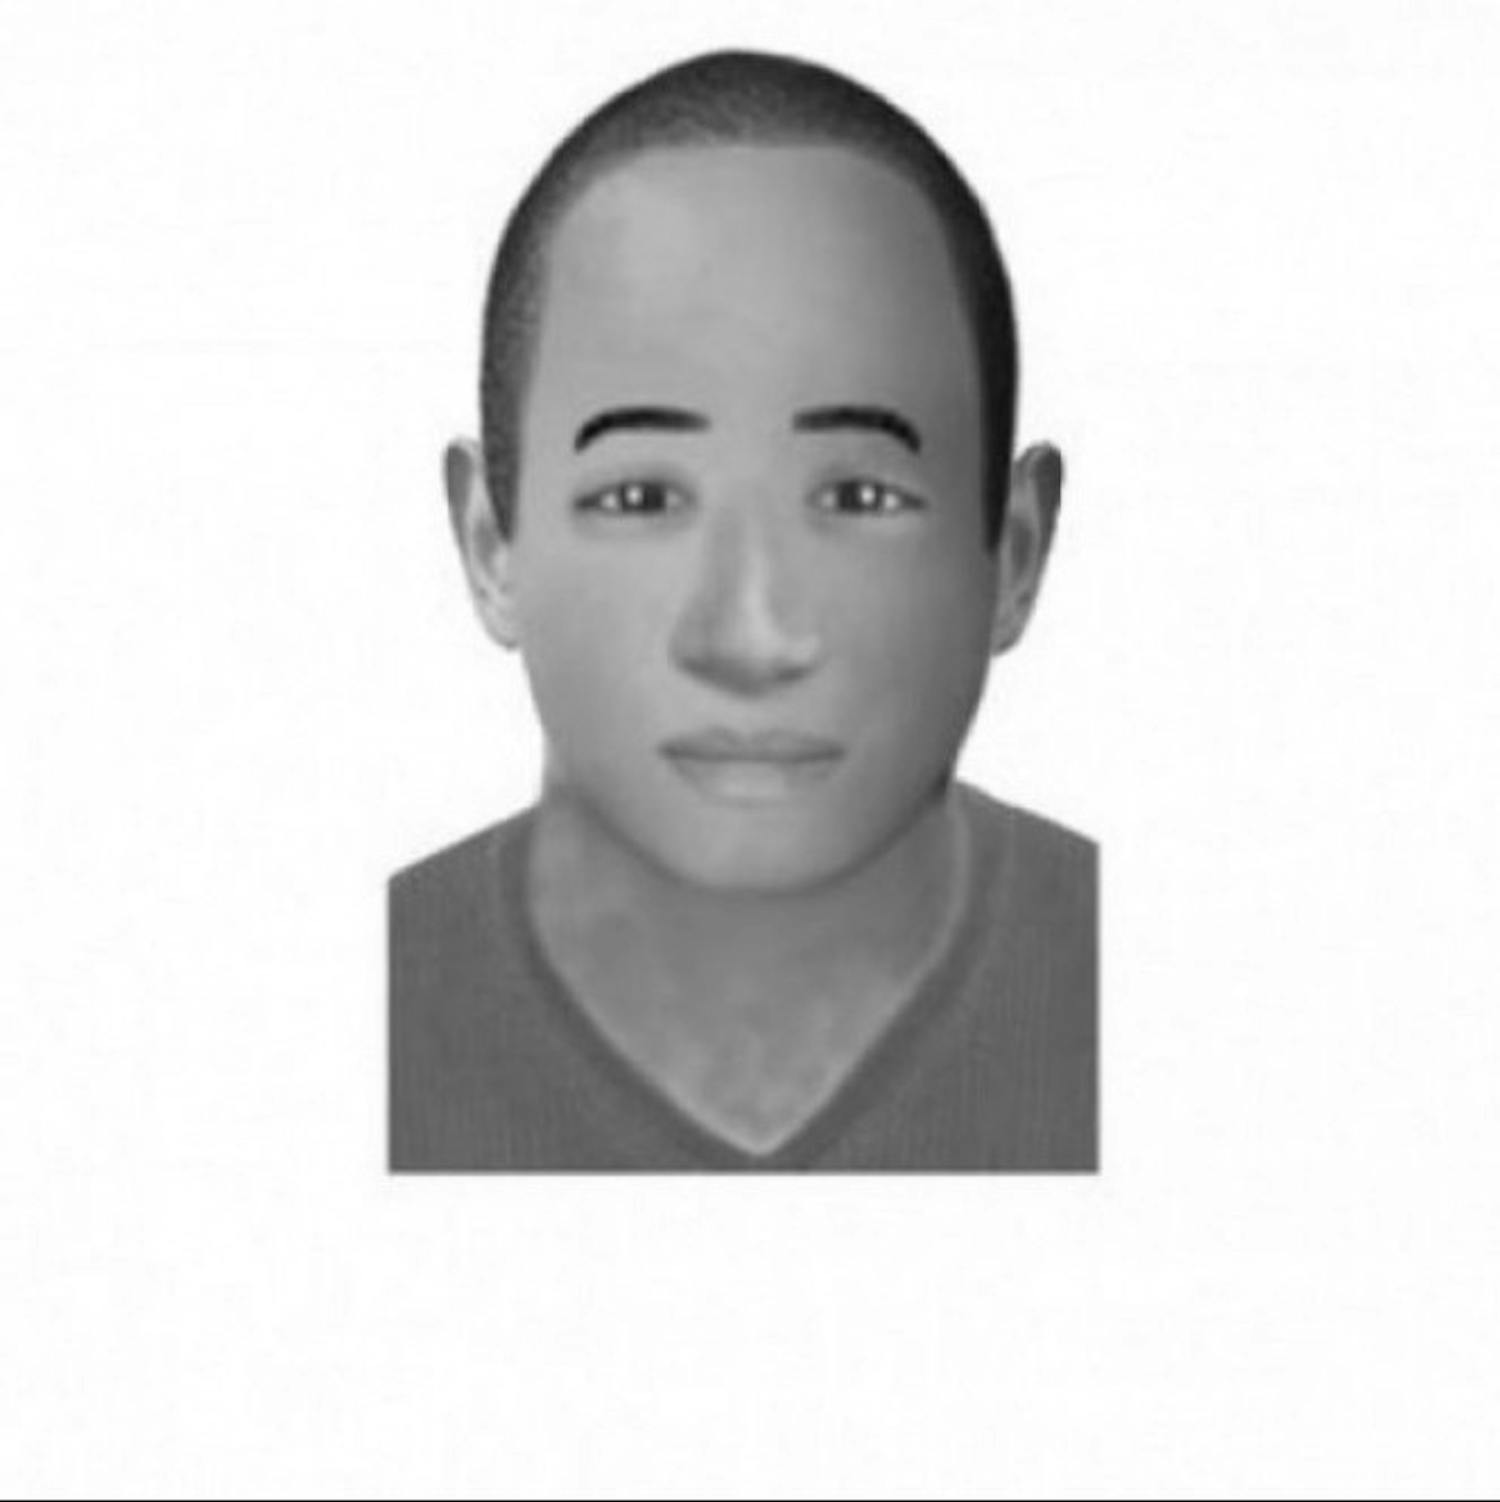 Police provided this composite sketch of the suspect in an attempted sexual assault.